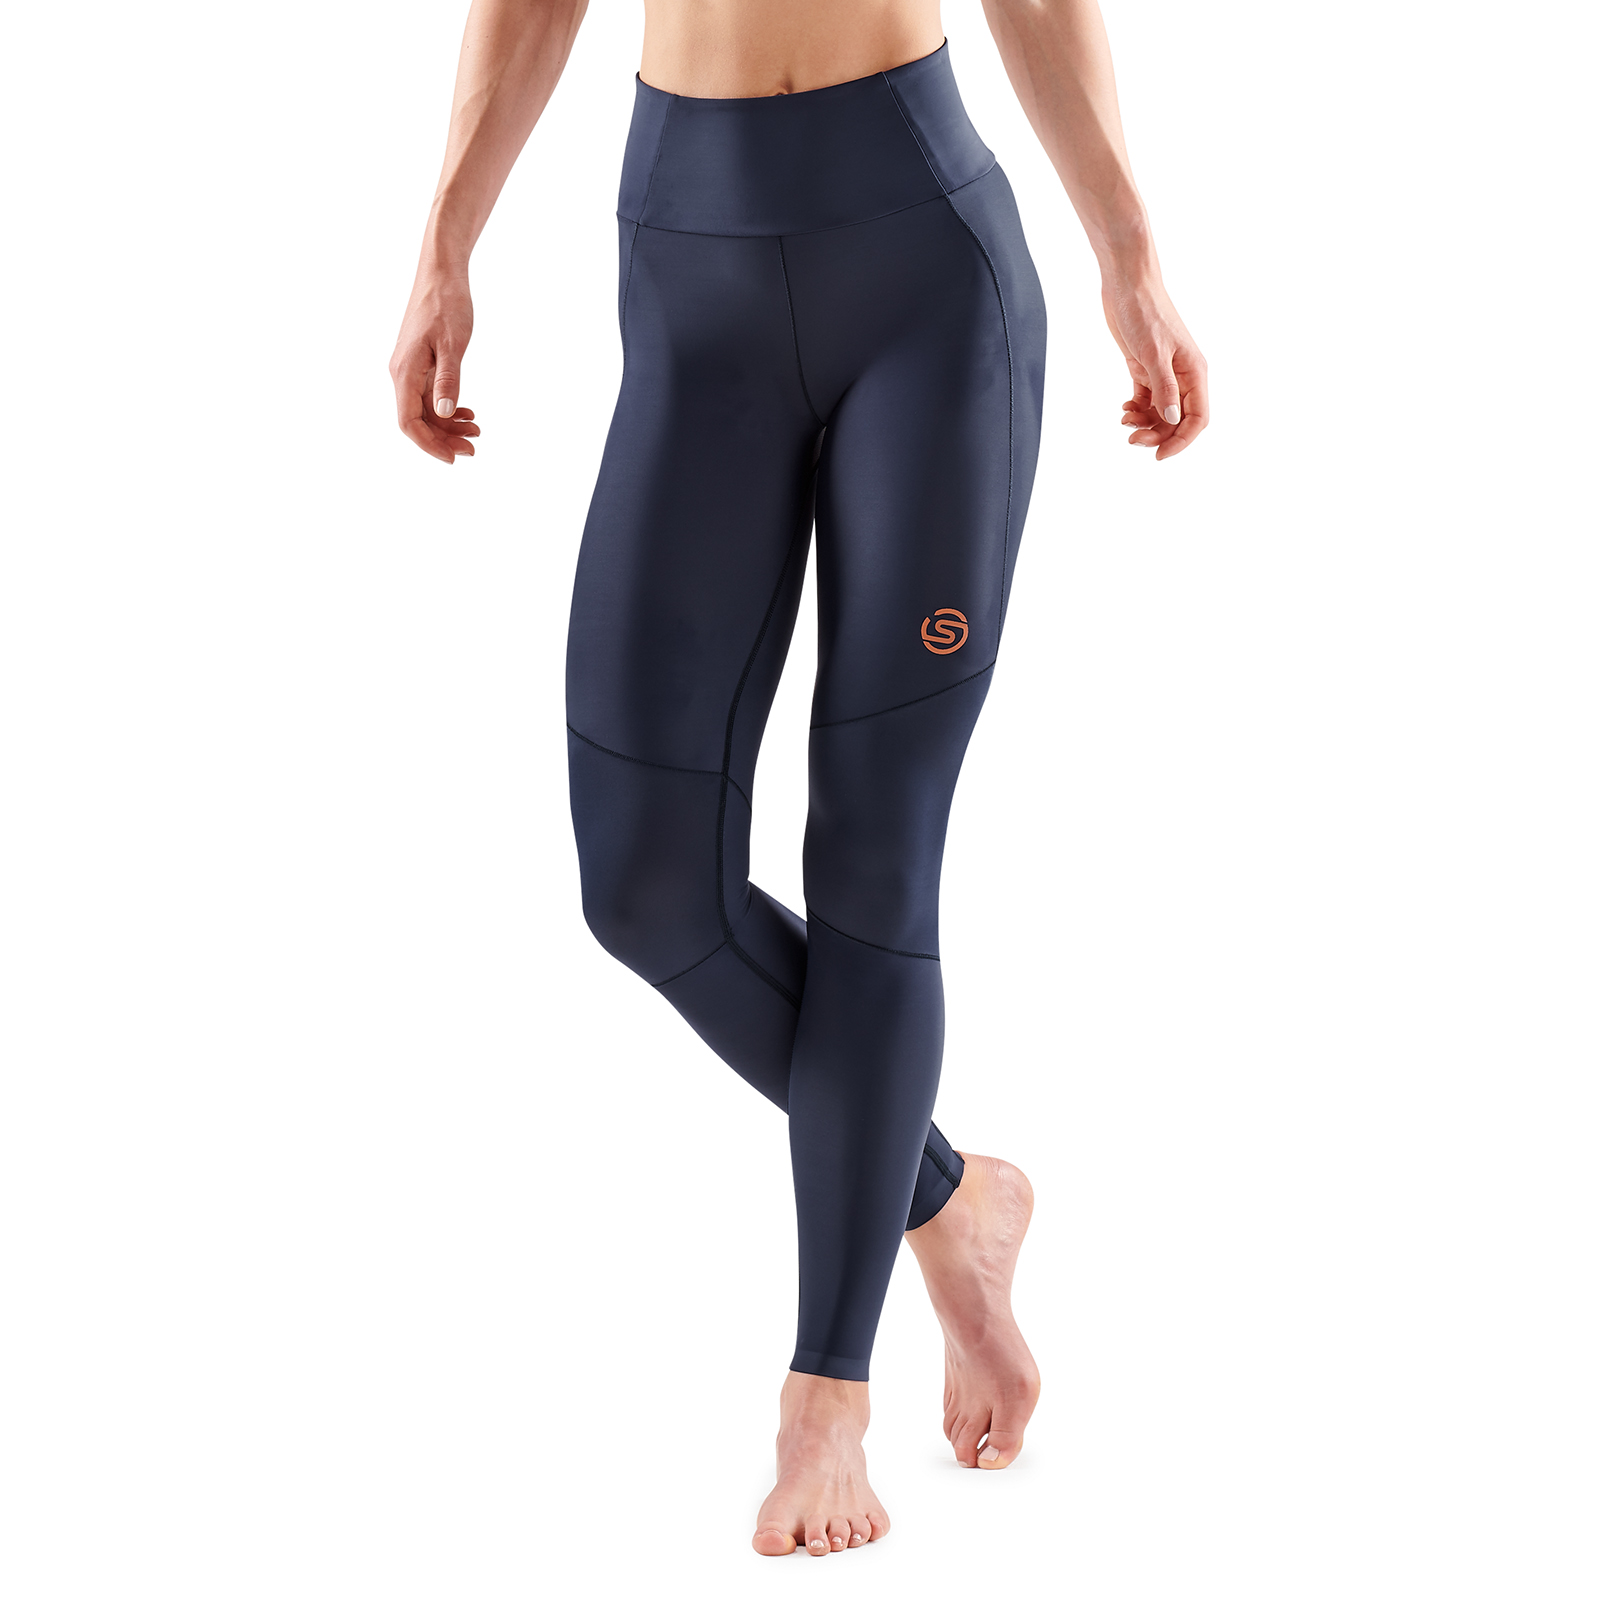  SKINS Women's A400Compression Long Tights, Skyscraper Black,  Small : Clothing, Shoes & Jewelry